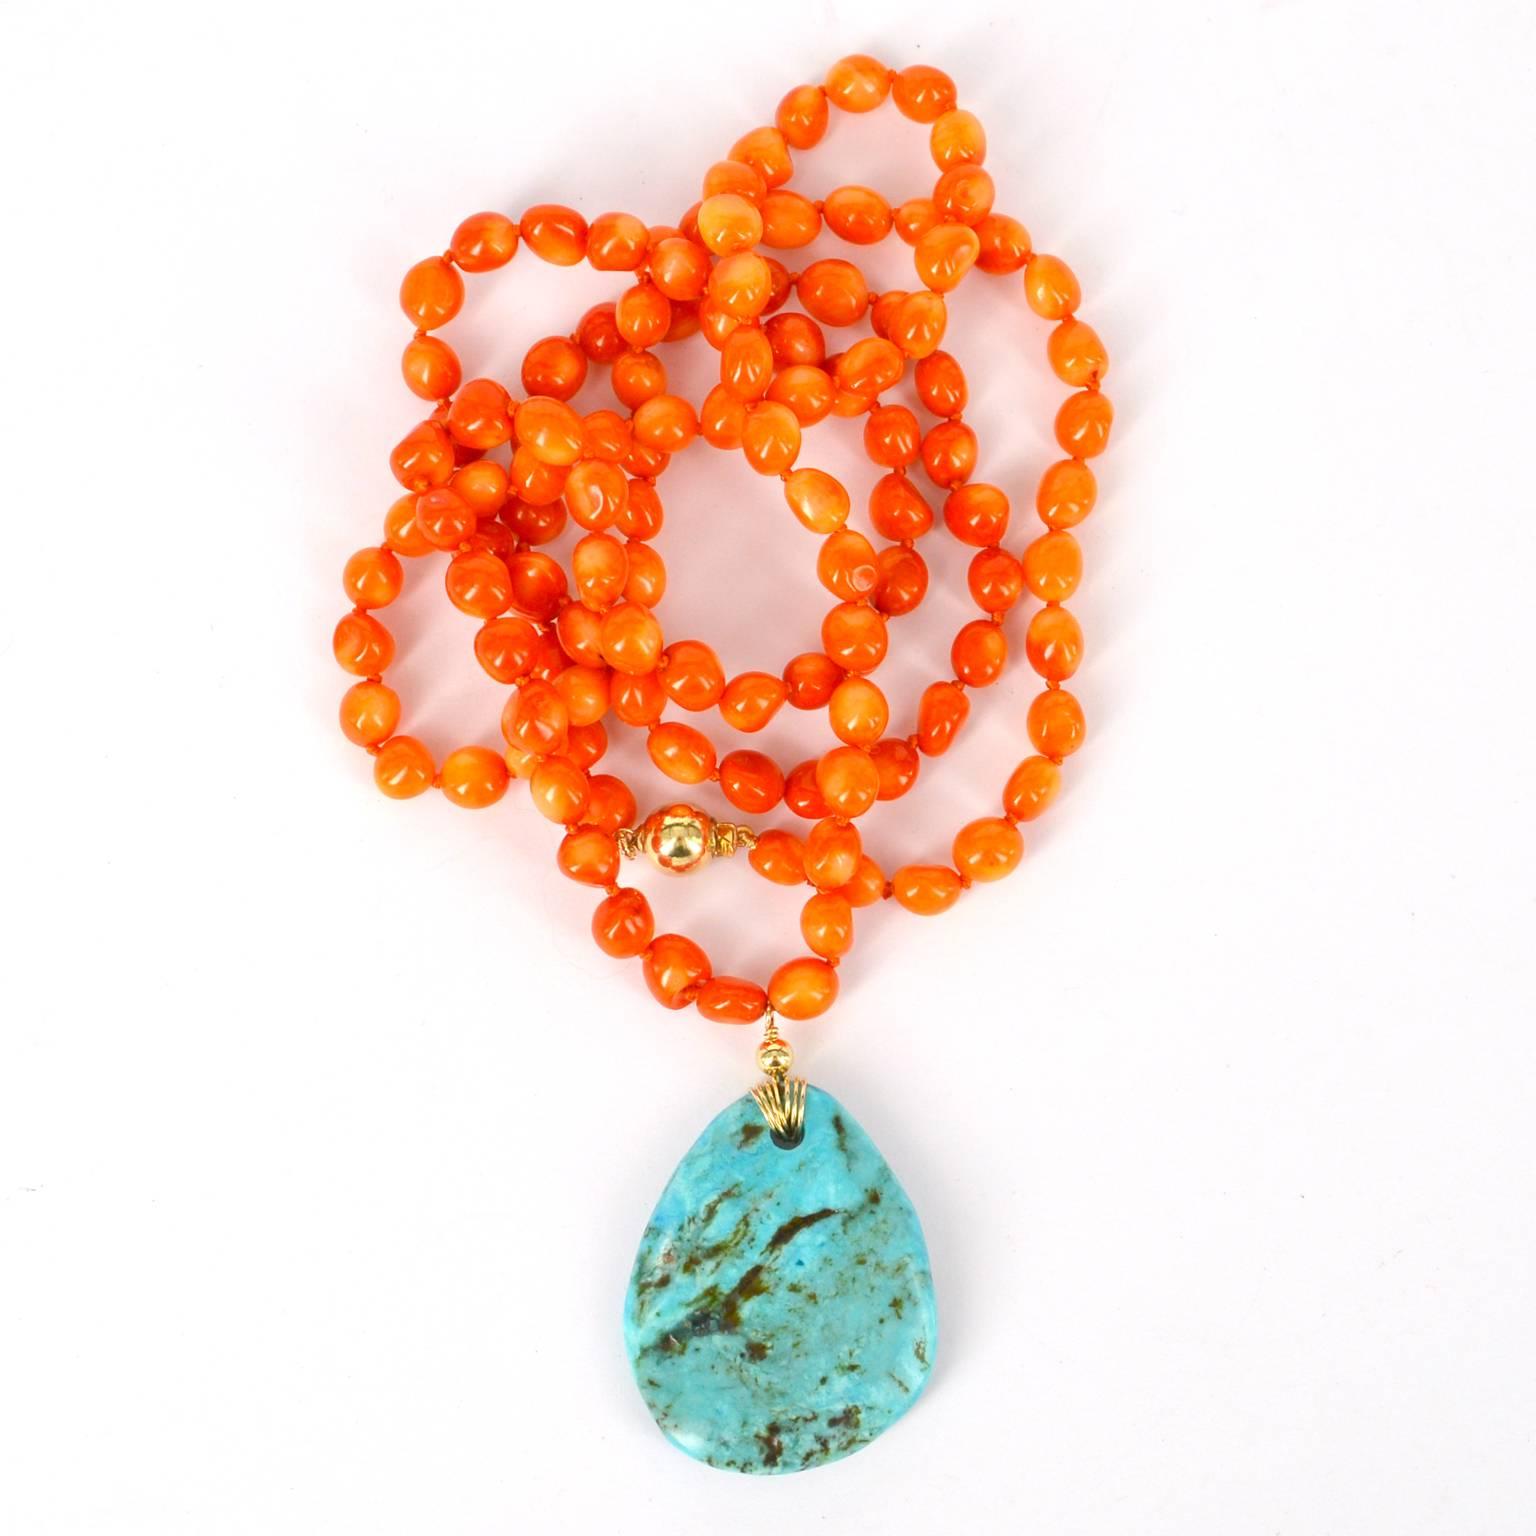 Modern Decadent Jewels Coral and Turquoise Gold Sautoir Necklace